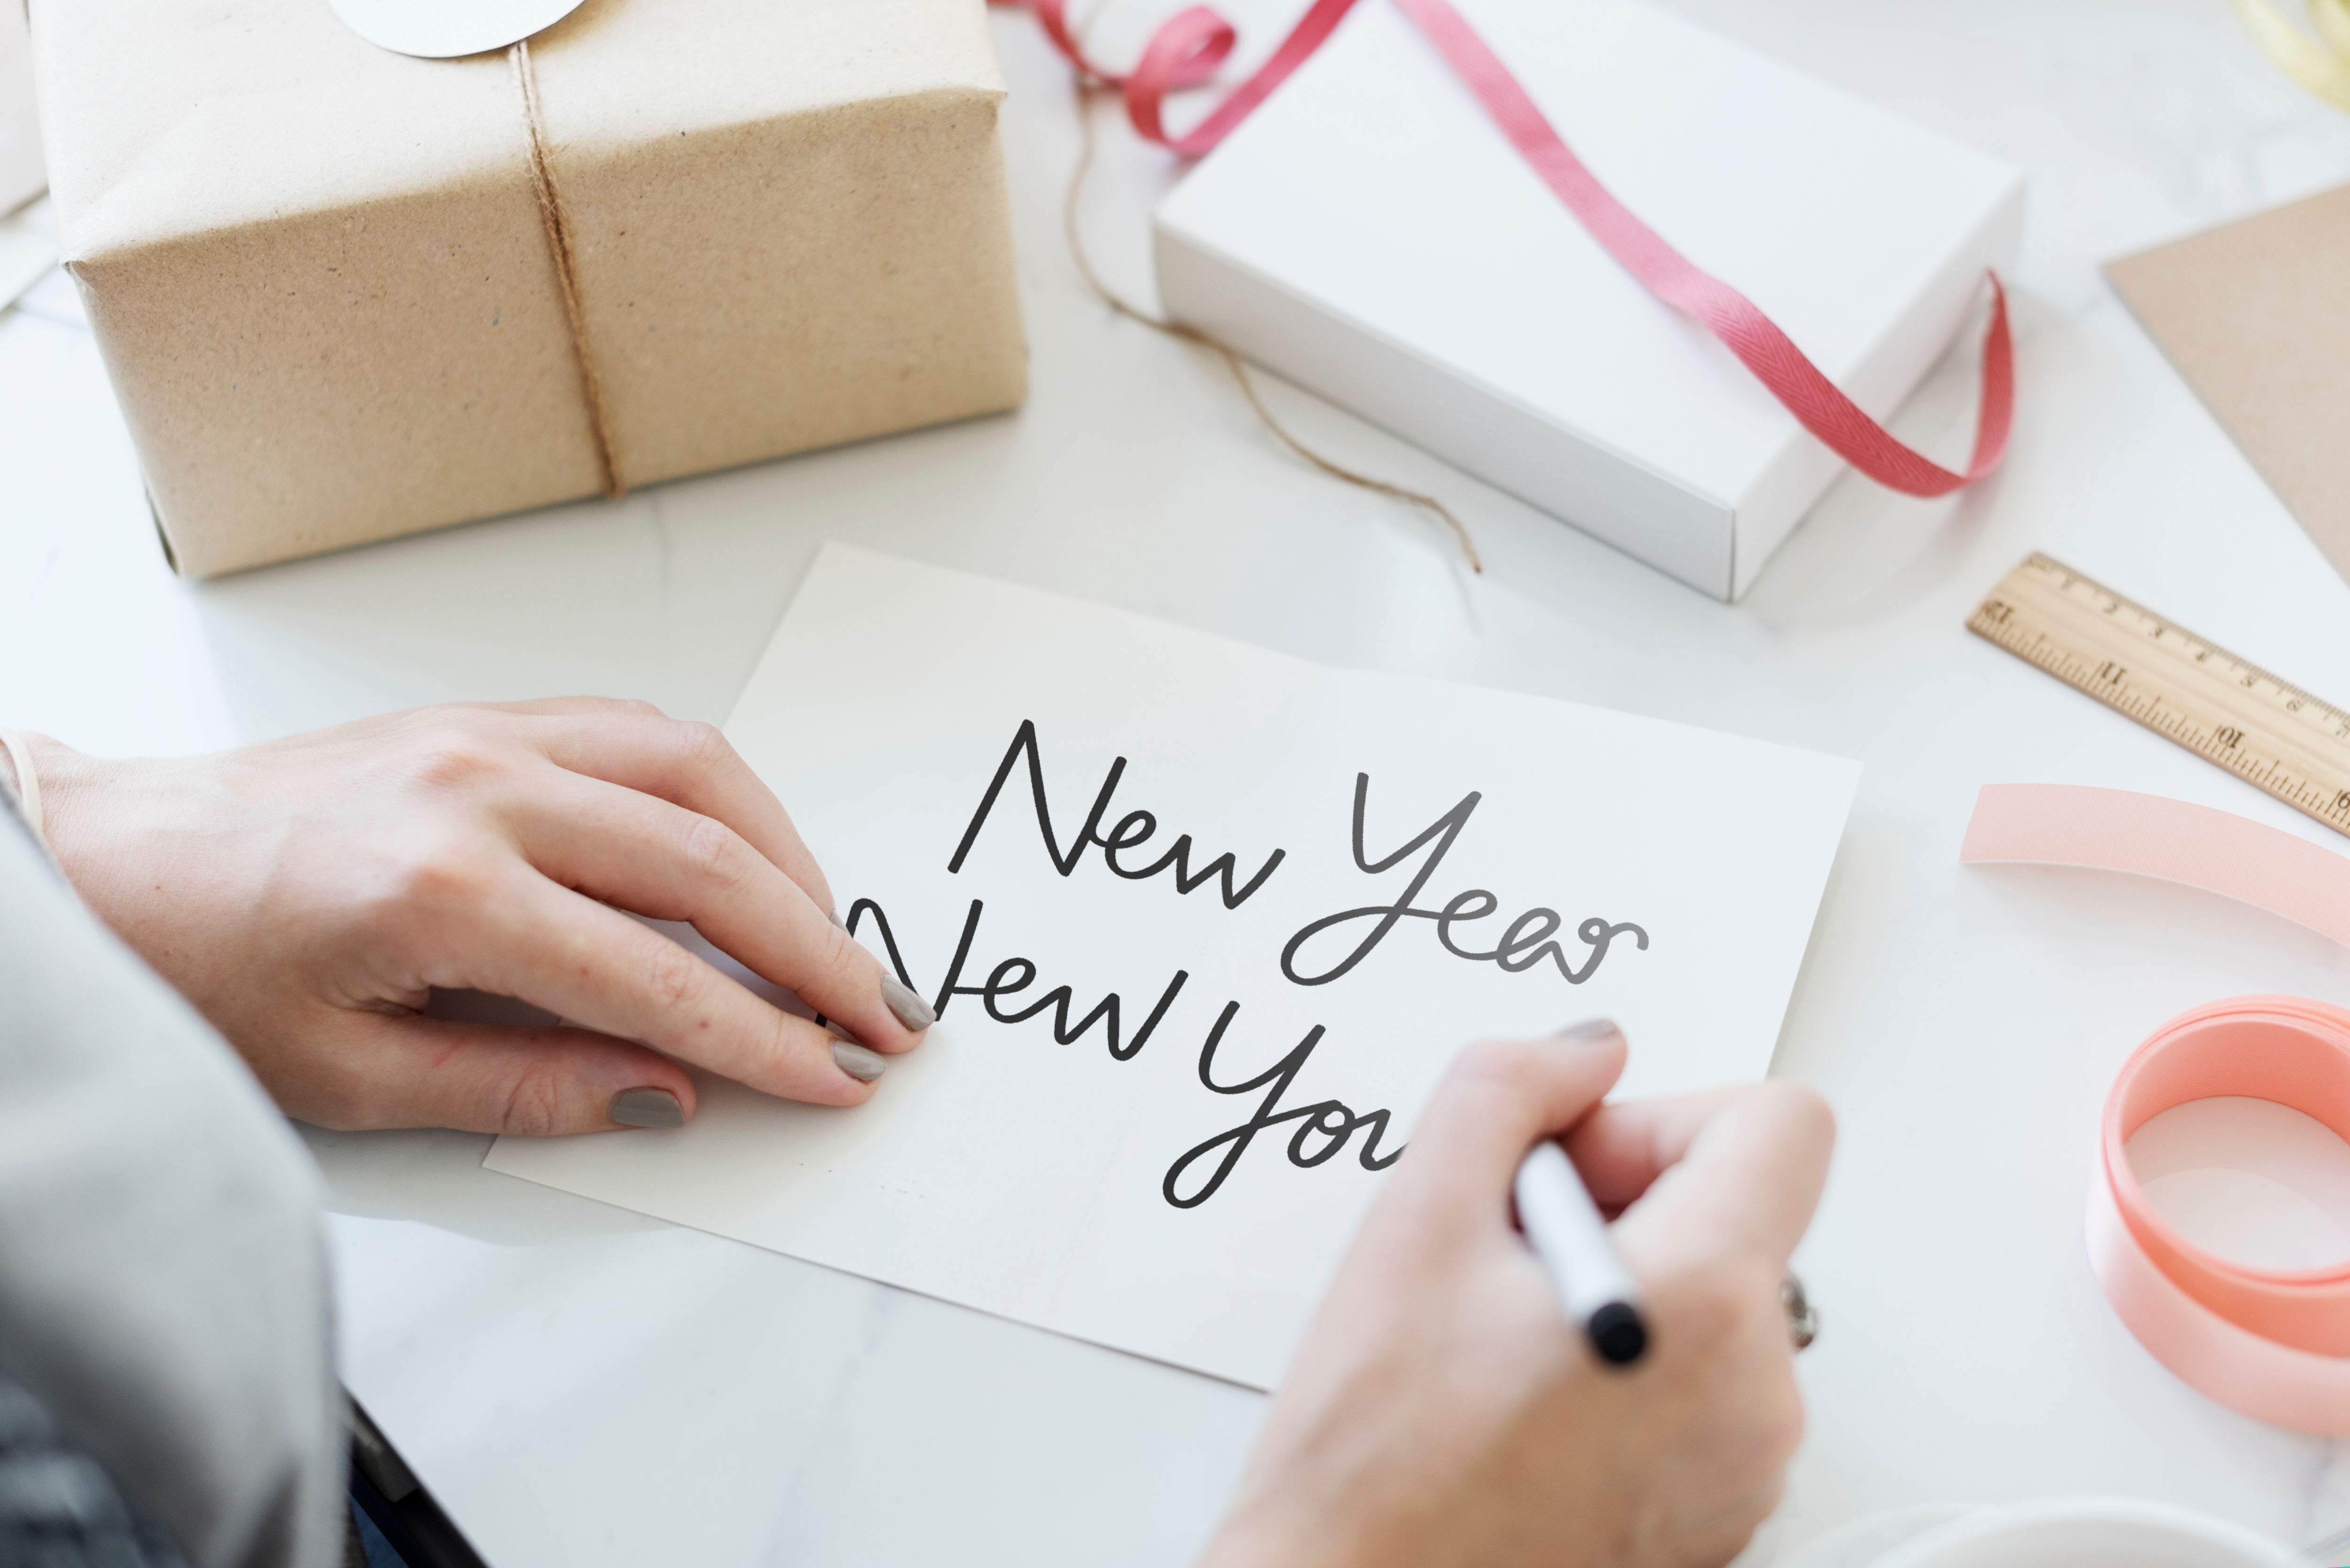 Hand writing New Year New You on white card